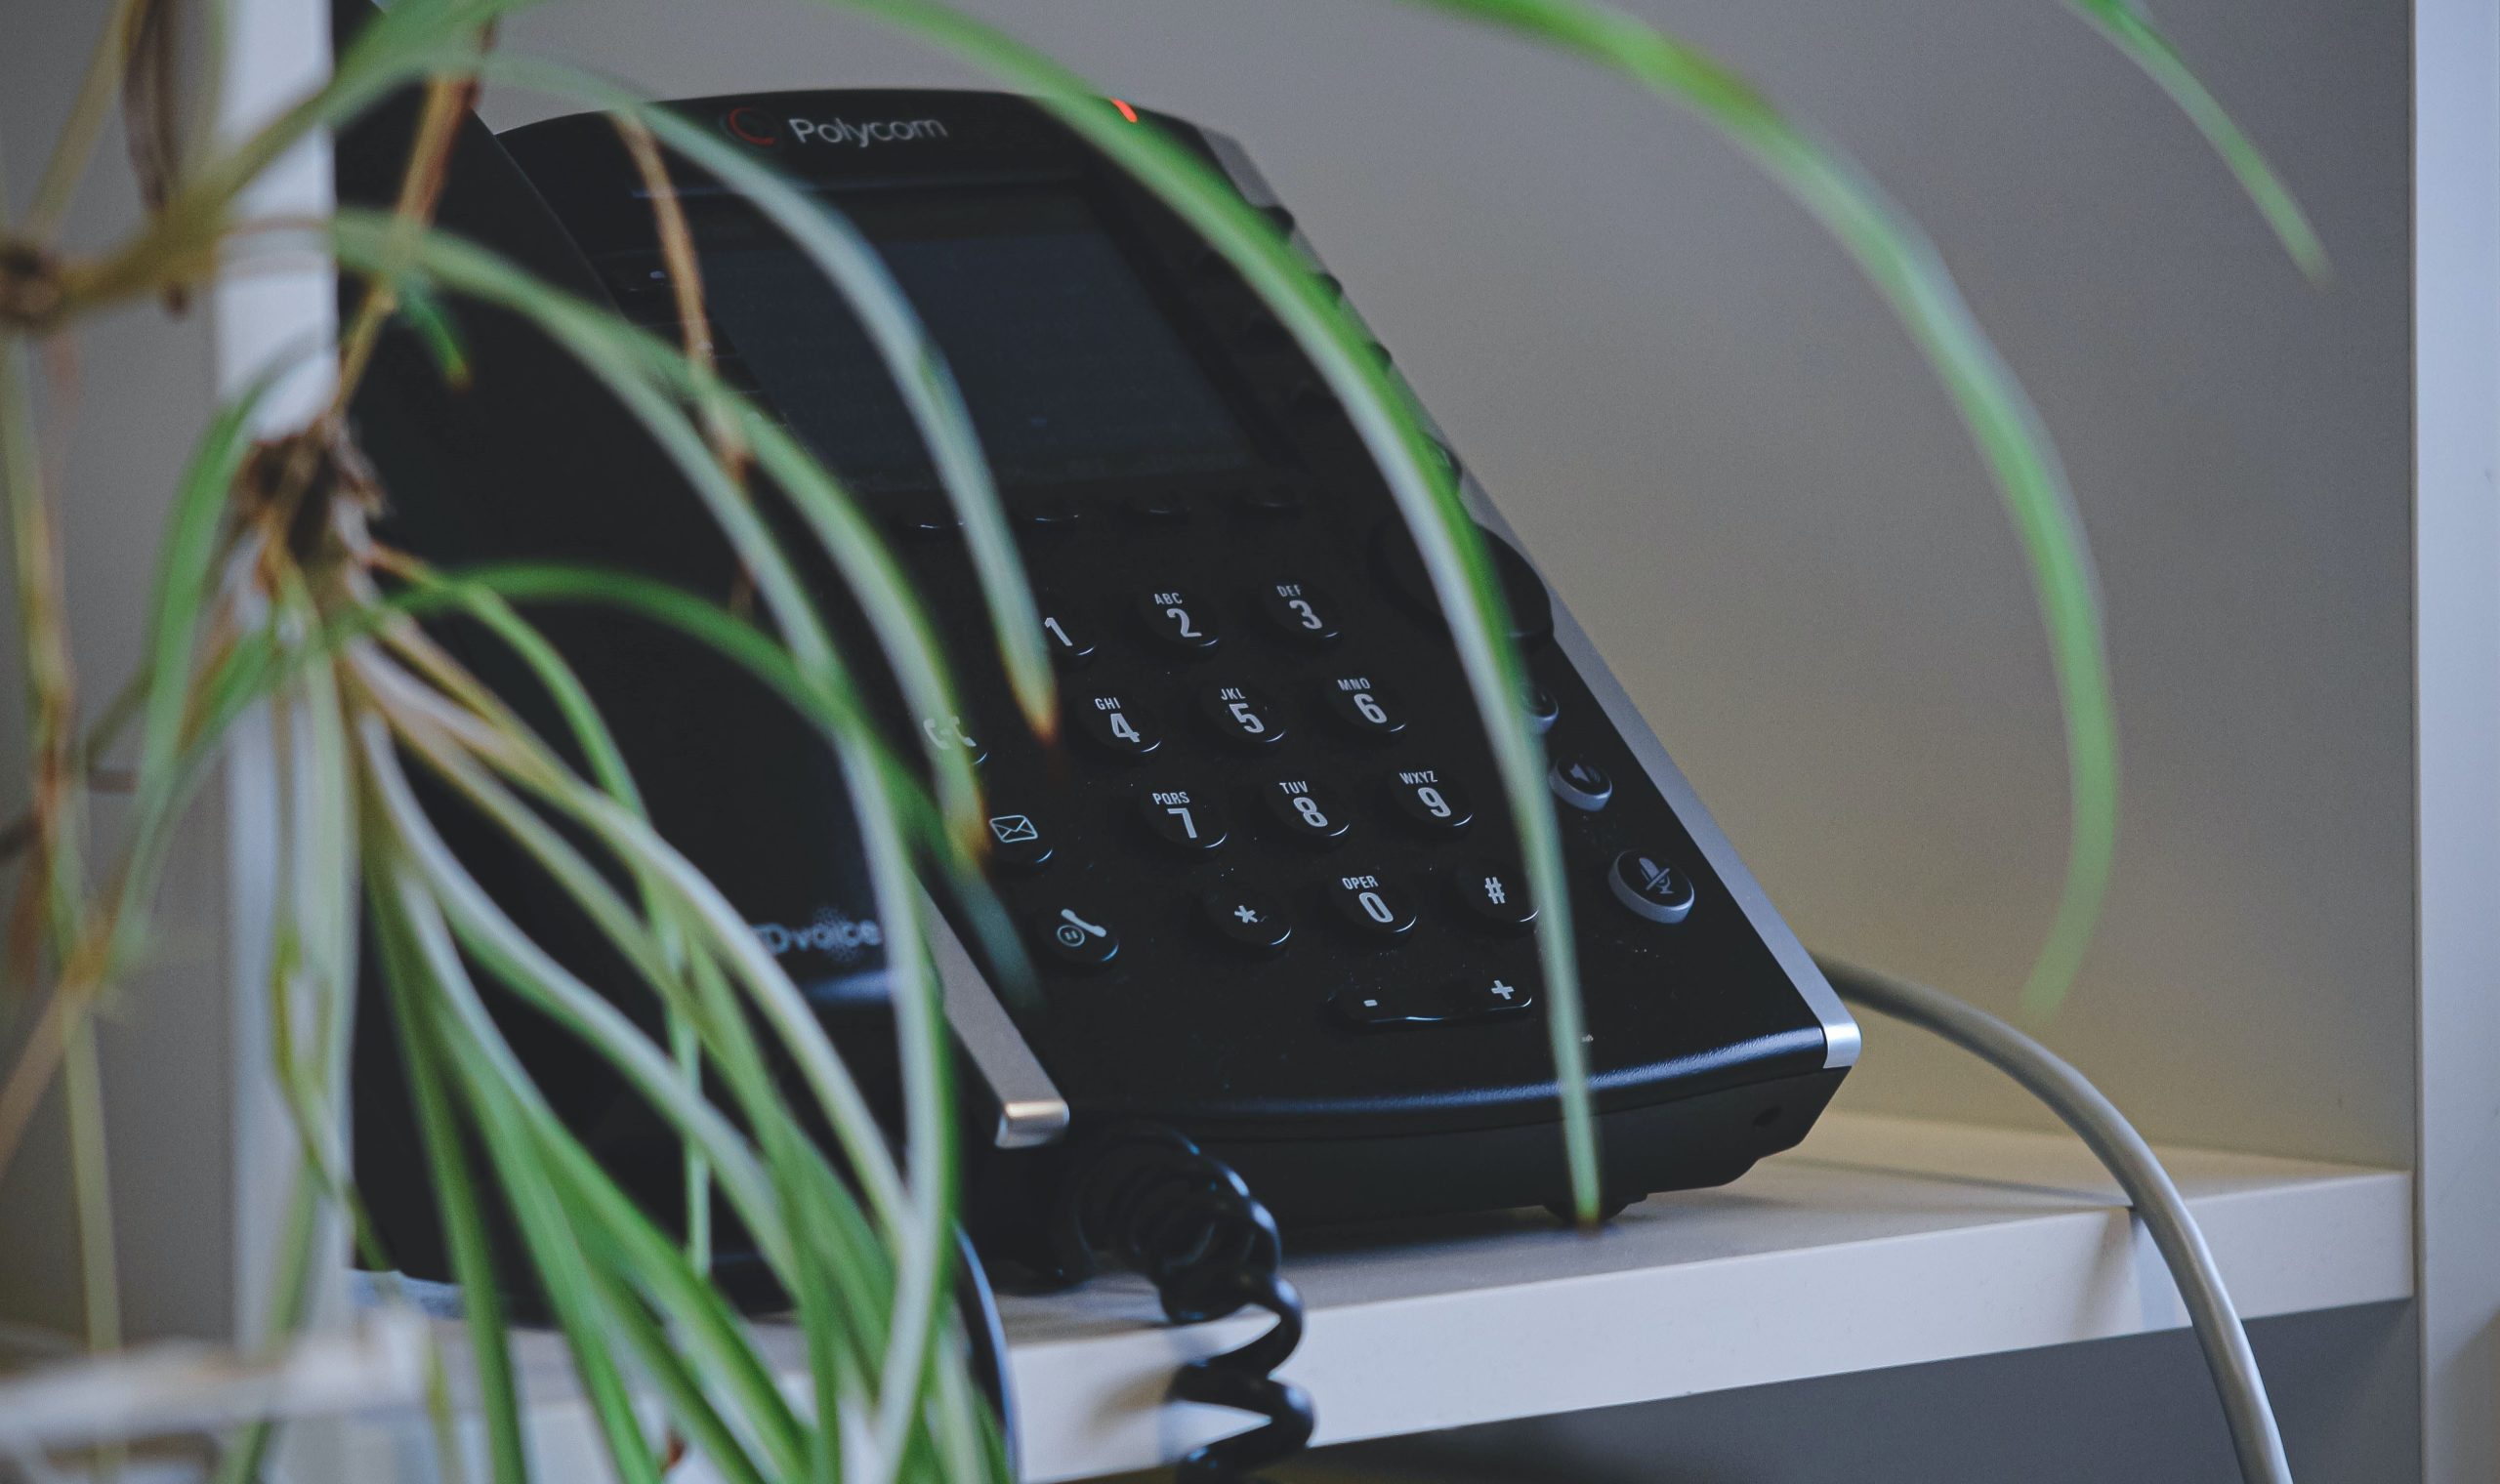 Fax machine obscured by a plant.